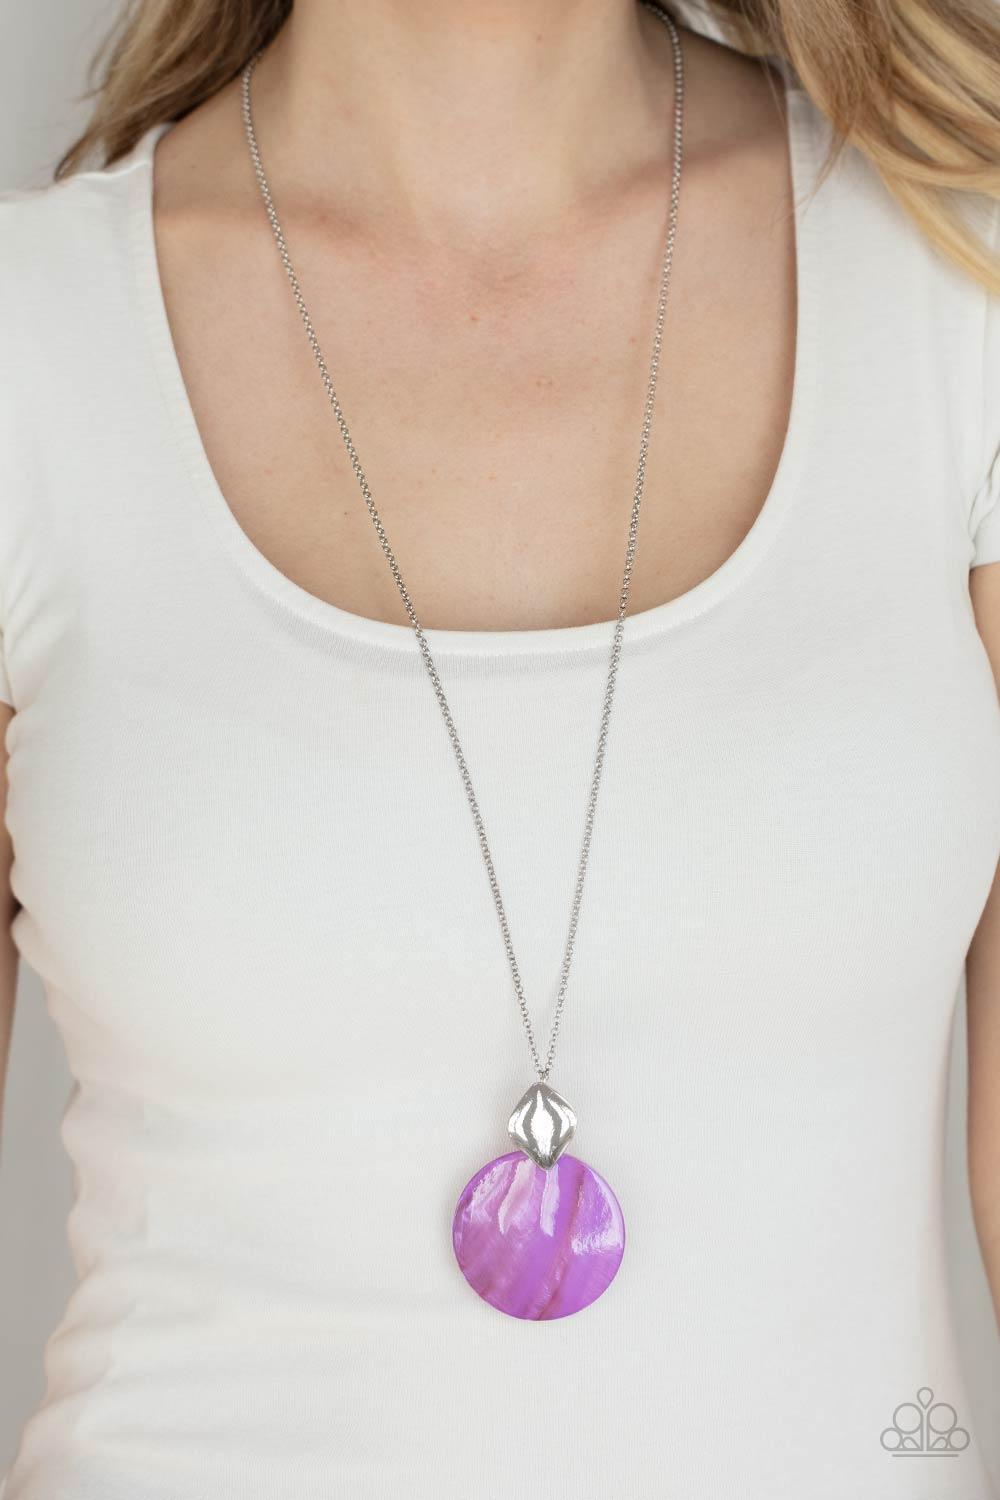 Paparazzi Accessories Tidal Tease - Purple Featuring a glistening iridescence, a Lavender shell-like disc attaches to a shiny silver frame at the bottom of a lengthened silver chain, creating a summery pendant. Features an adjustable clasp closure. Sold a